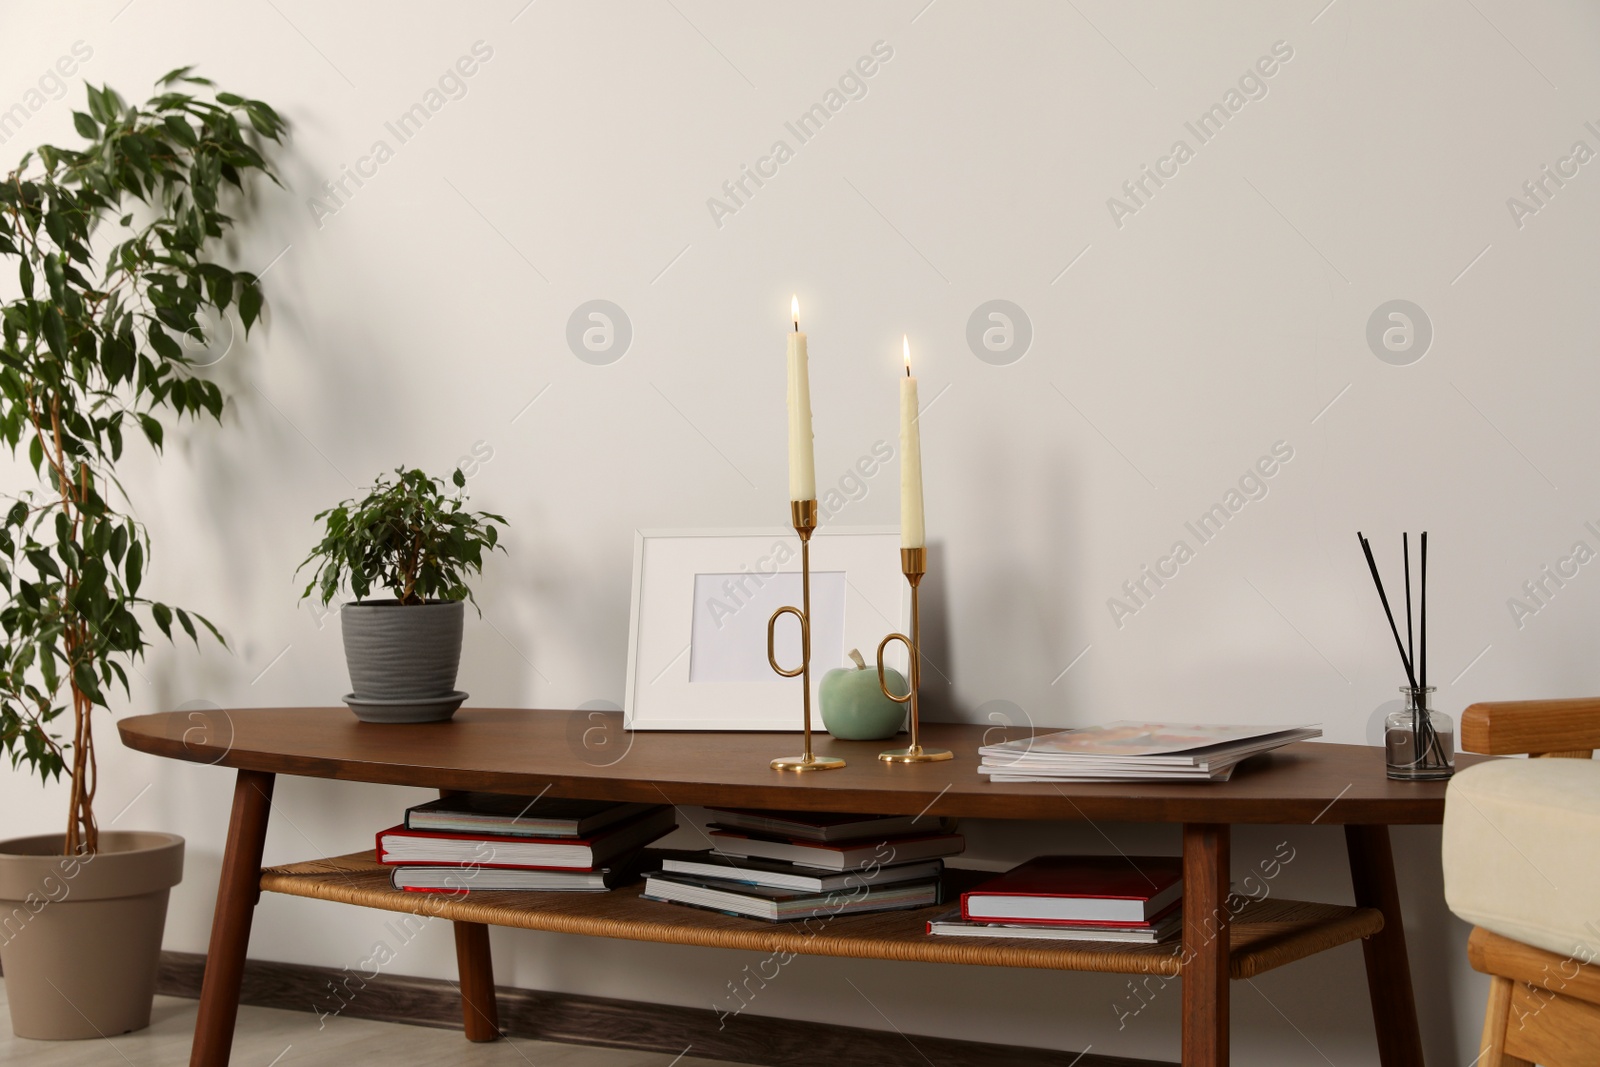 Photo of Wooden table with decorative elements near light wall in room. Interior design